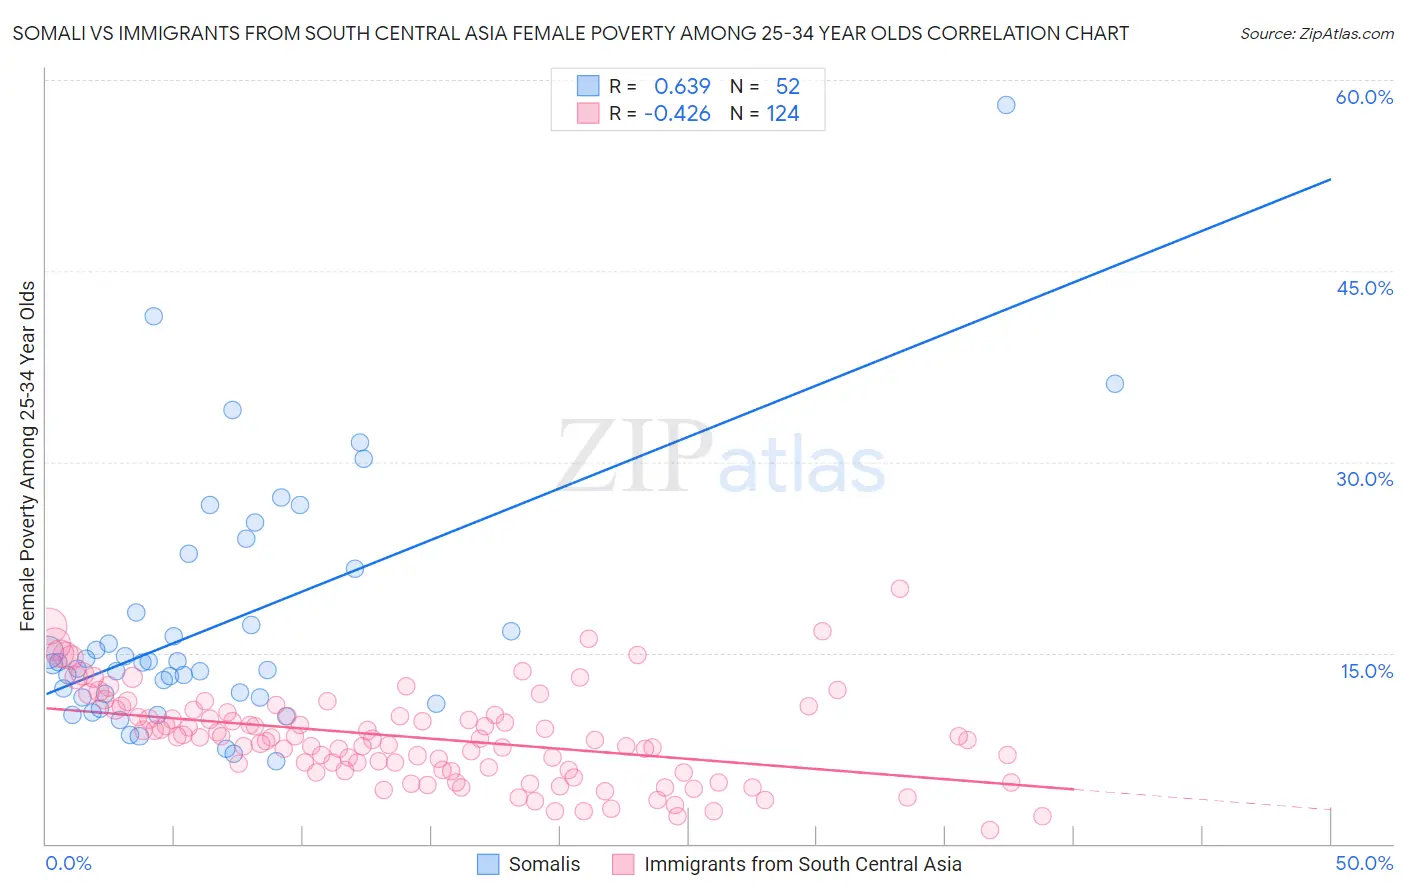 Somali vs Immigrants from South Central Asia Female Poverty Among 25-34 Year Olds